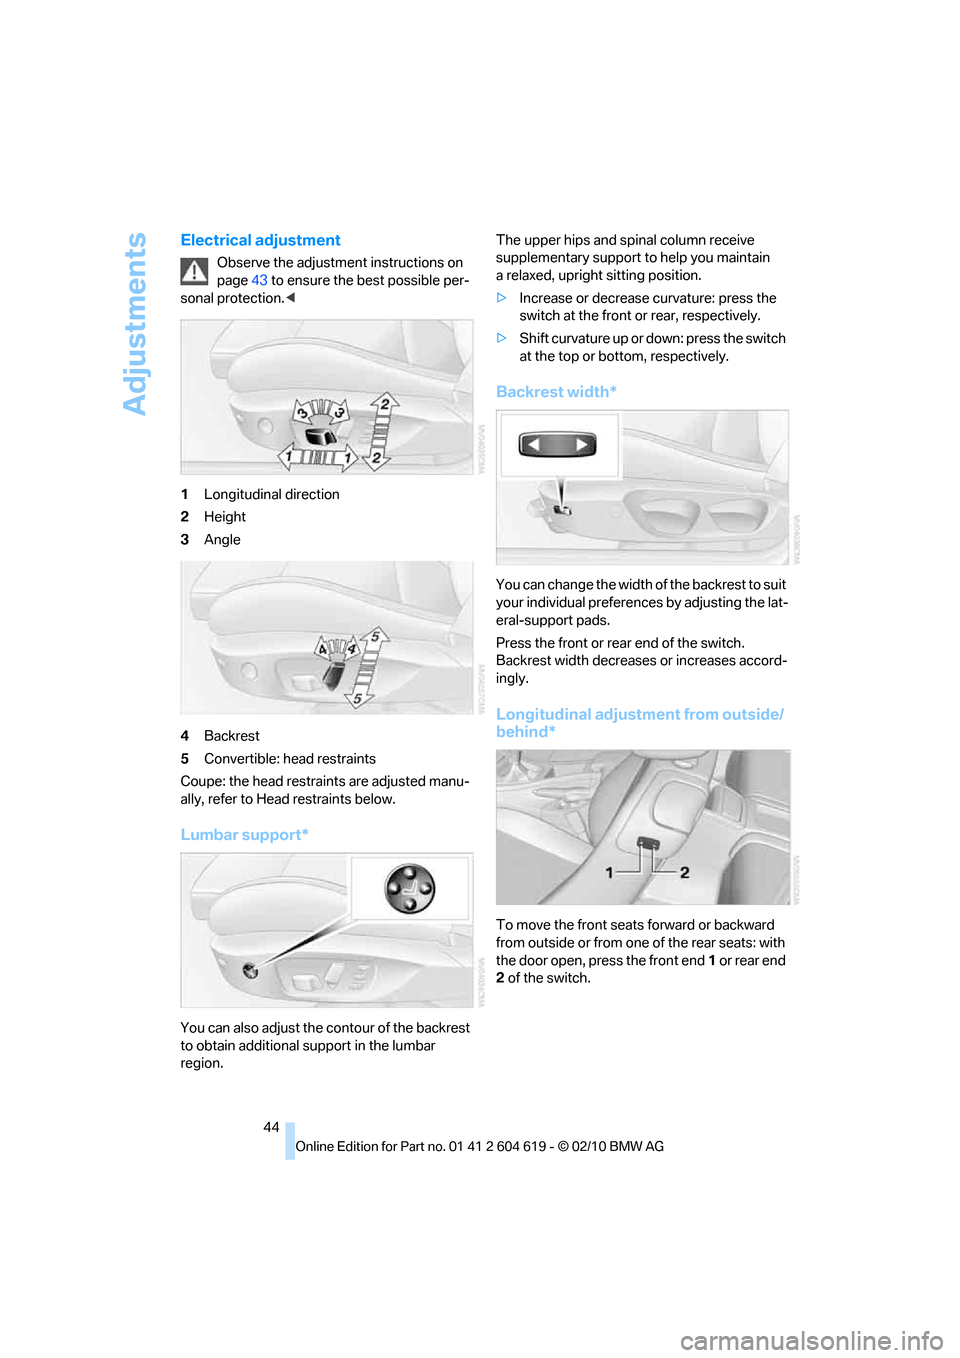 BMW 328I CONVERTIBLE 2011 E94 Owners Manual Adjustments
44
Electrical adjustment
Observe the adjustment instructions on 
page43 to ensure the best possible per-
sonal protection.<
1Longitudinal direction
2Height
3Angle
4Backrest
5Convertible: h